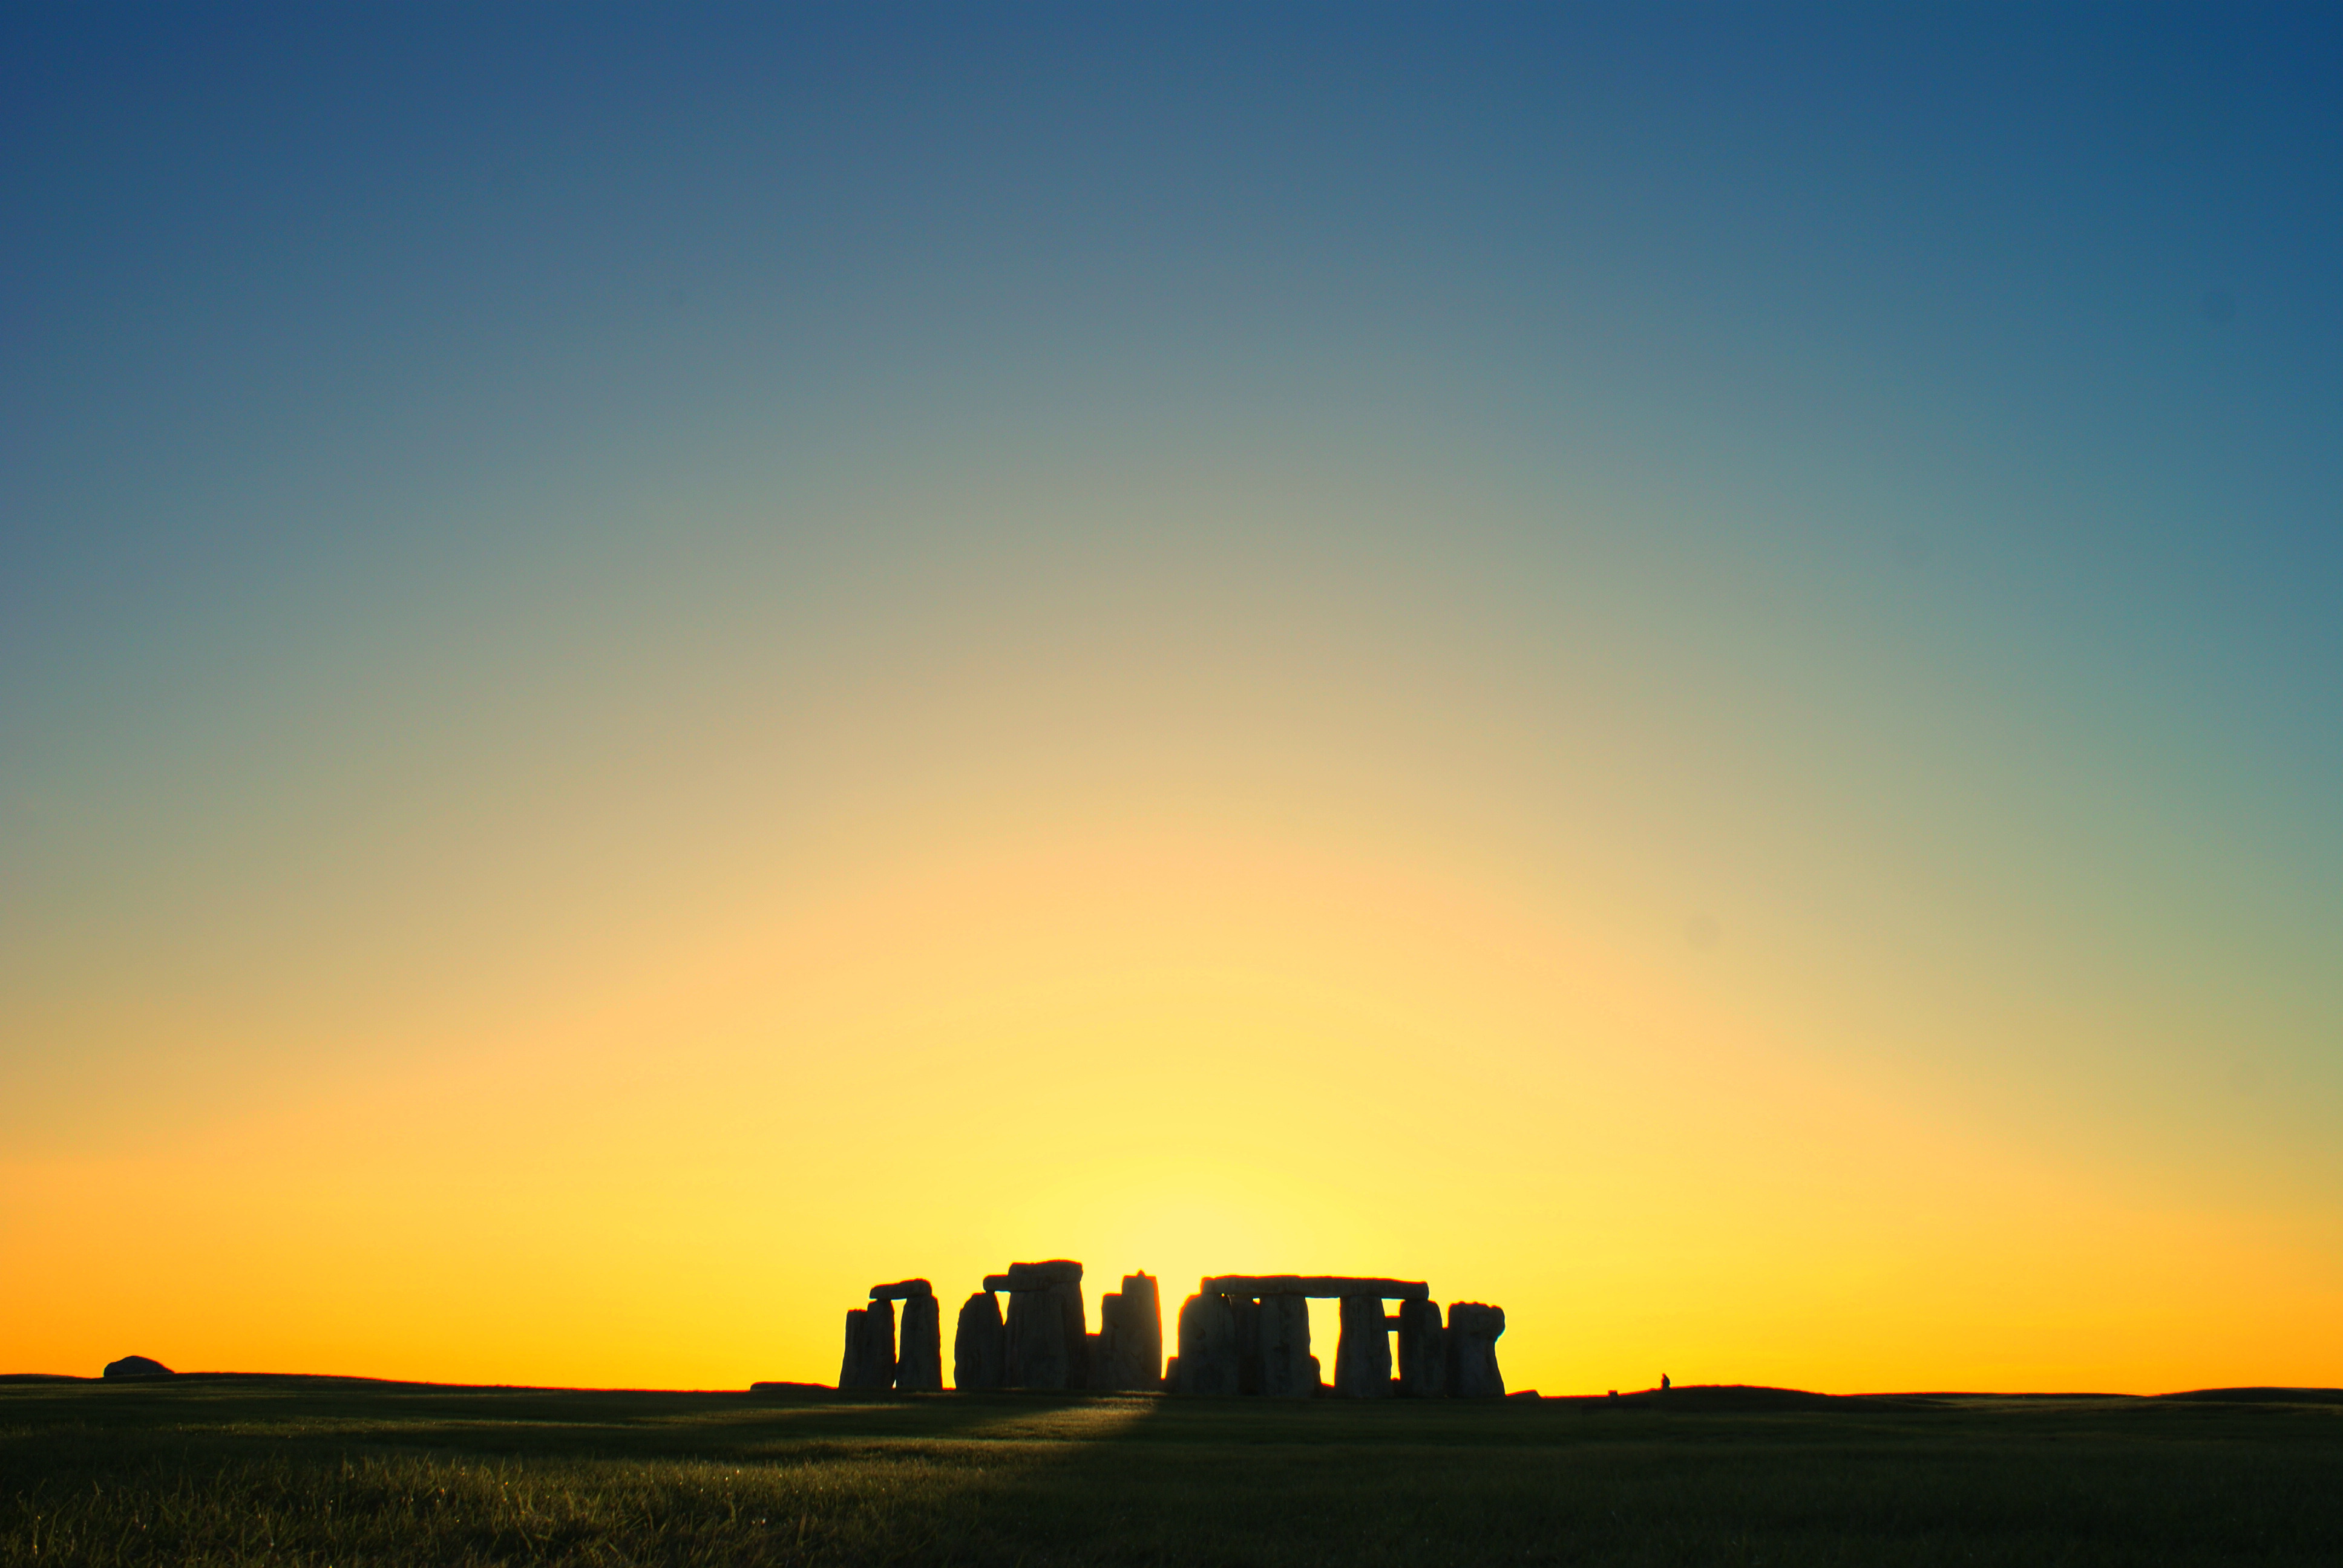 5 facts about winter solstice in Europe, which occurs in late December